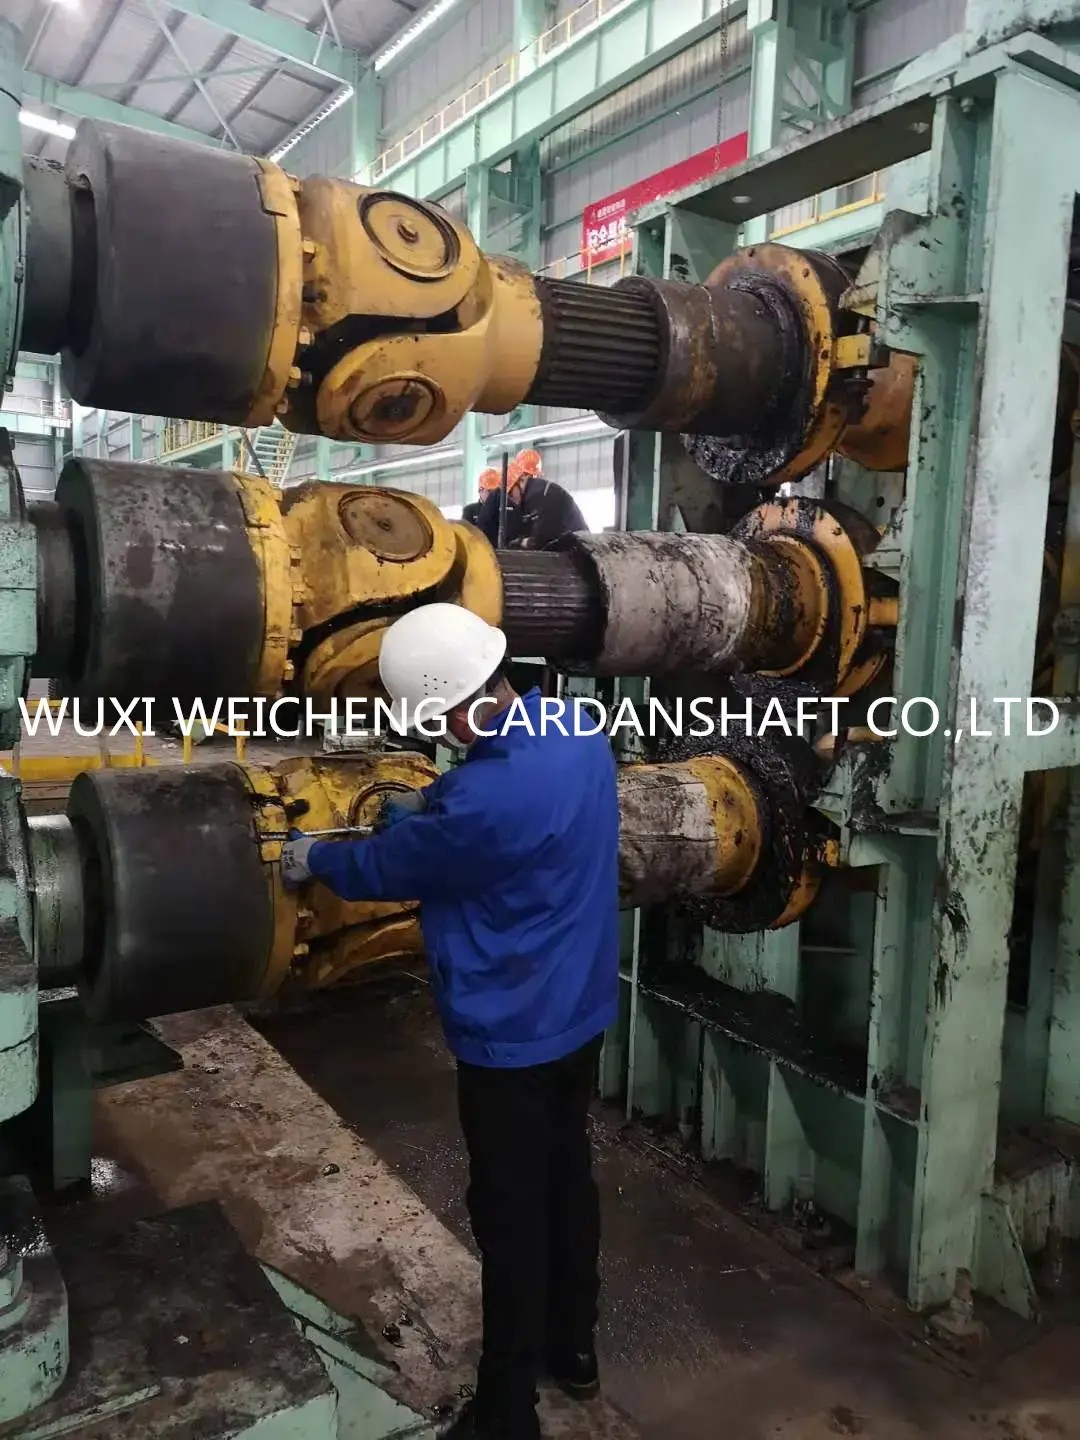 WEICHENG CARDANSHAFT engineers provide technical support t.png